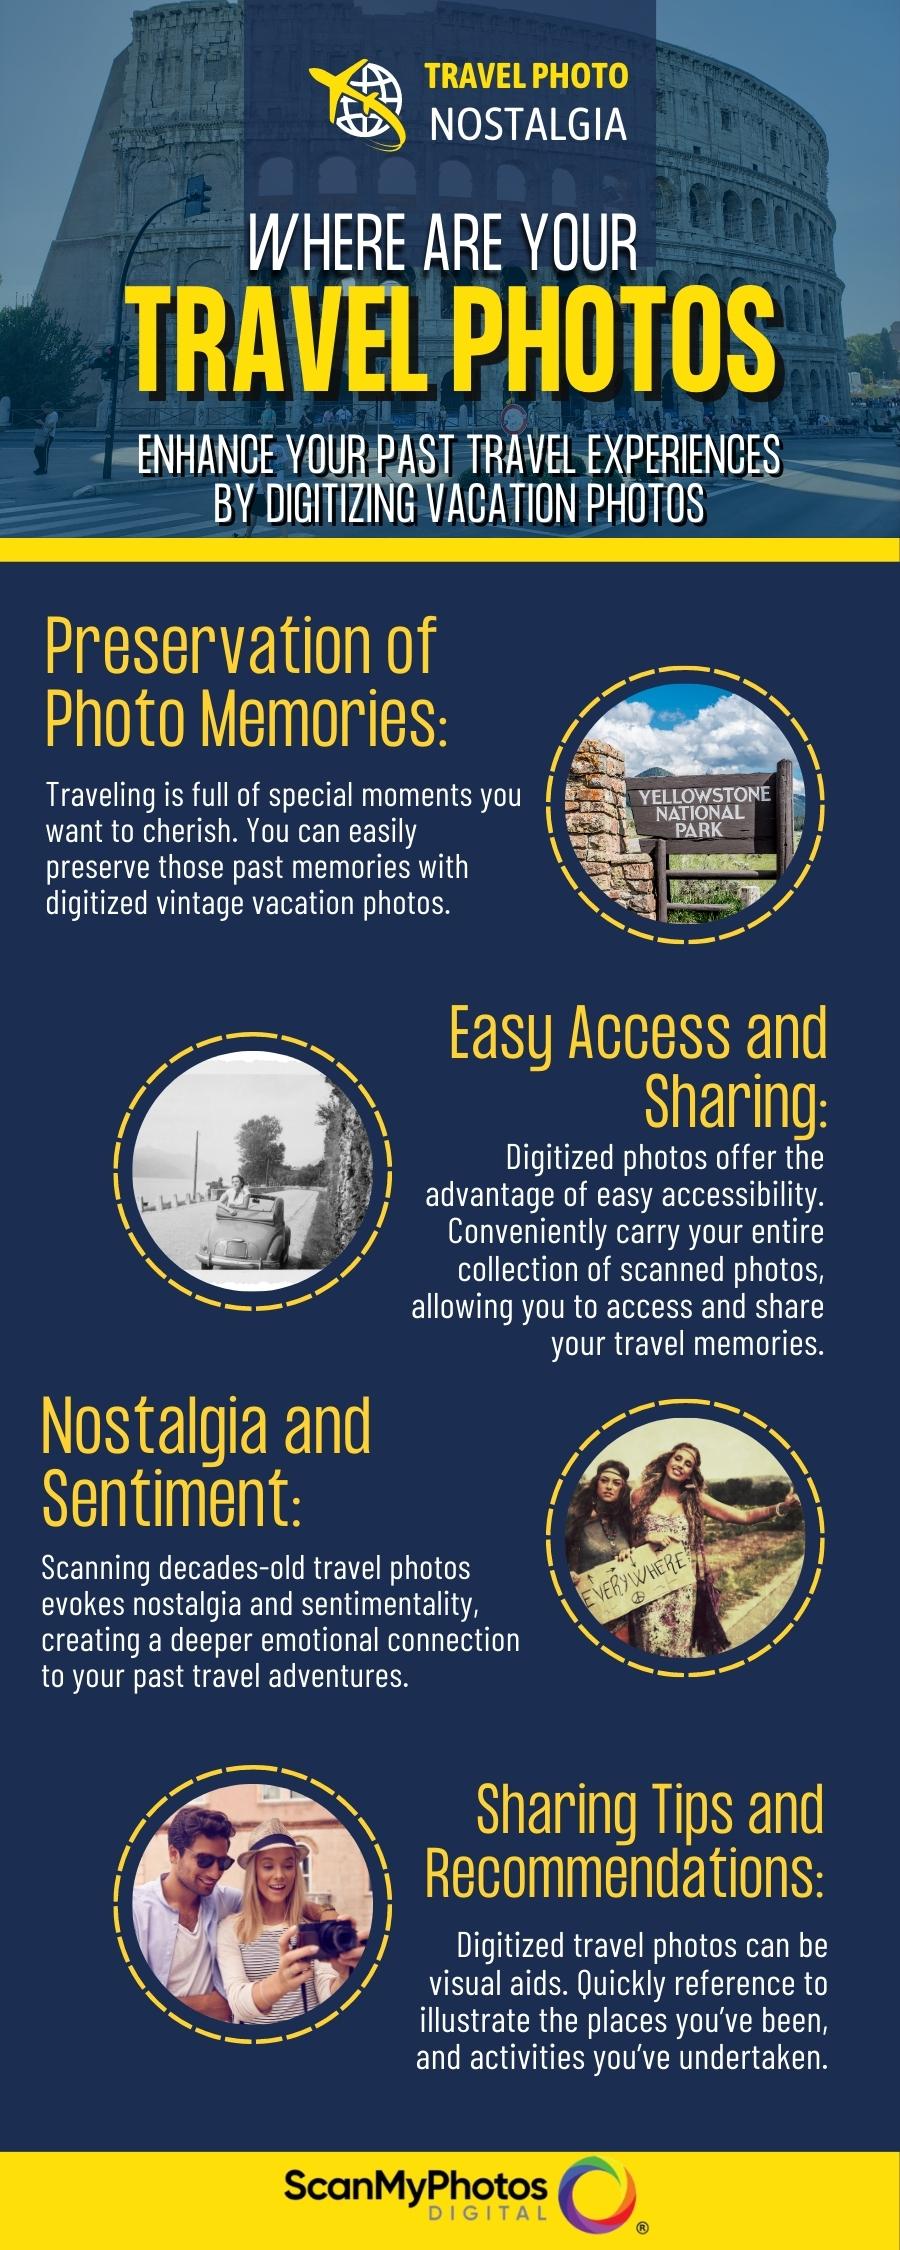 Are your travel photos digitized?